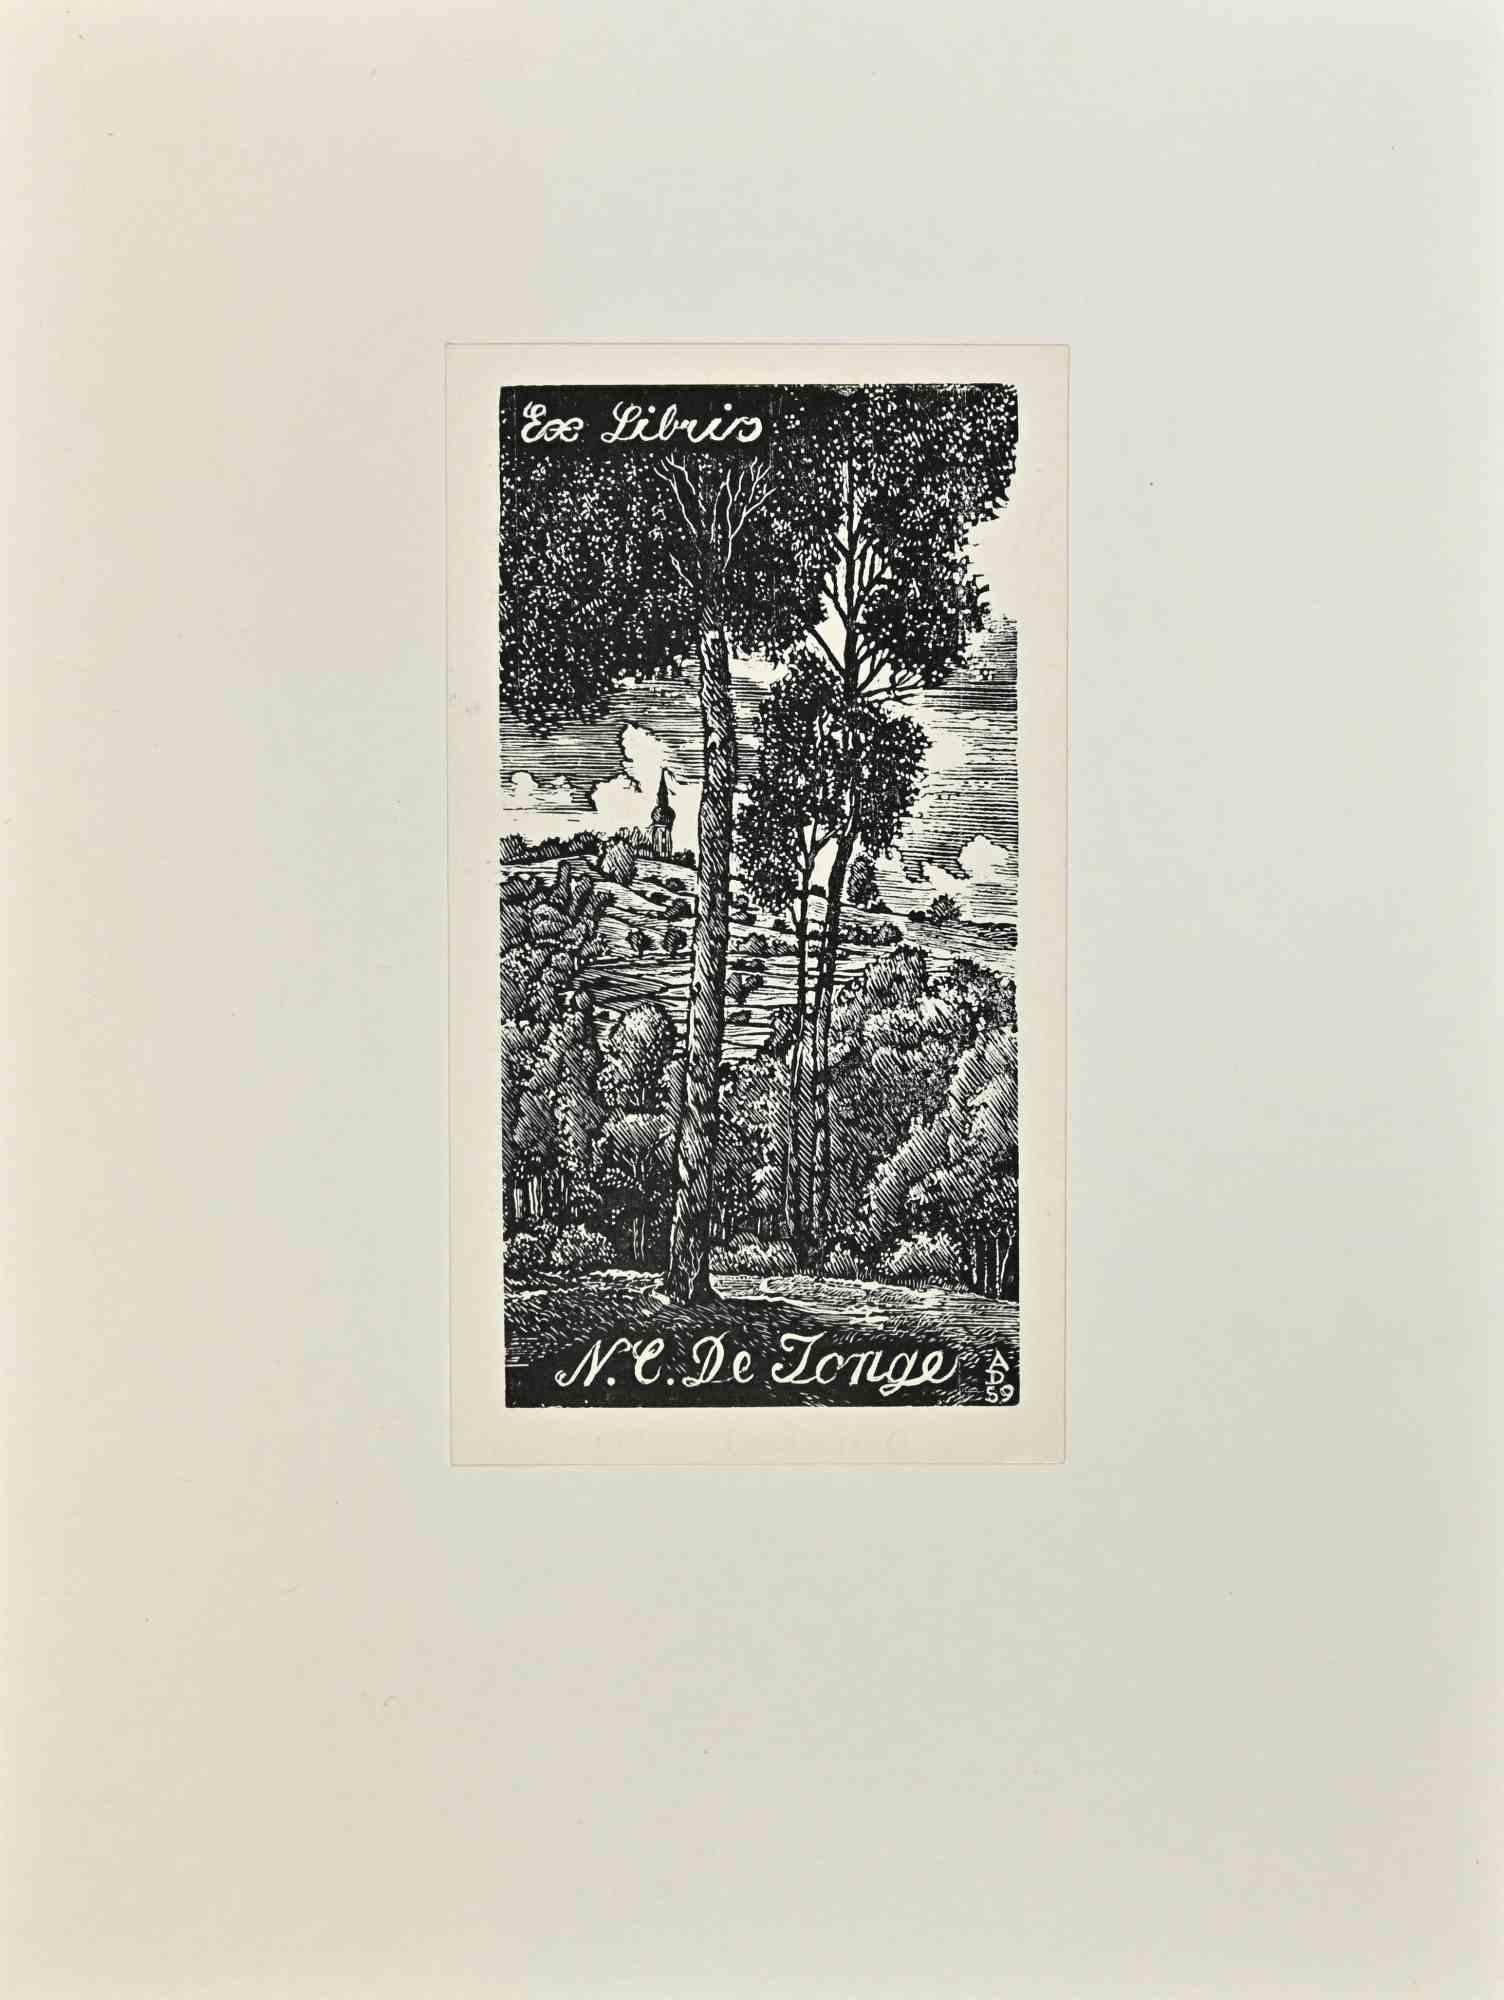 Ex Libris - N. C. De Jonge is a Modern Artwork realized in 1959 s. by the Czech author Antonin Dolezal (20 gennaio 1929)
 
B/W woodcut on paper.  Hand Signed on back.
 
The work is glued on cardboard.
 
Total dimensions: 20x 15 cm.

Excellent